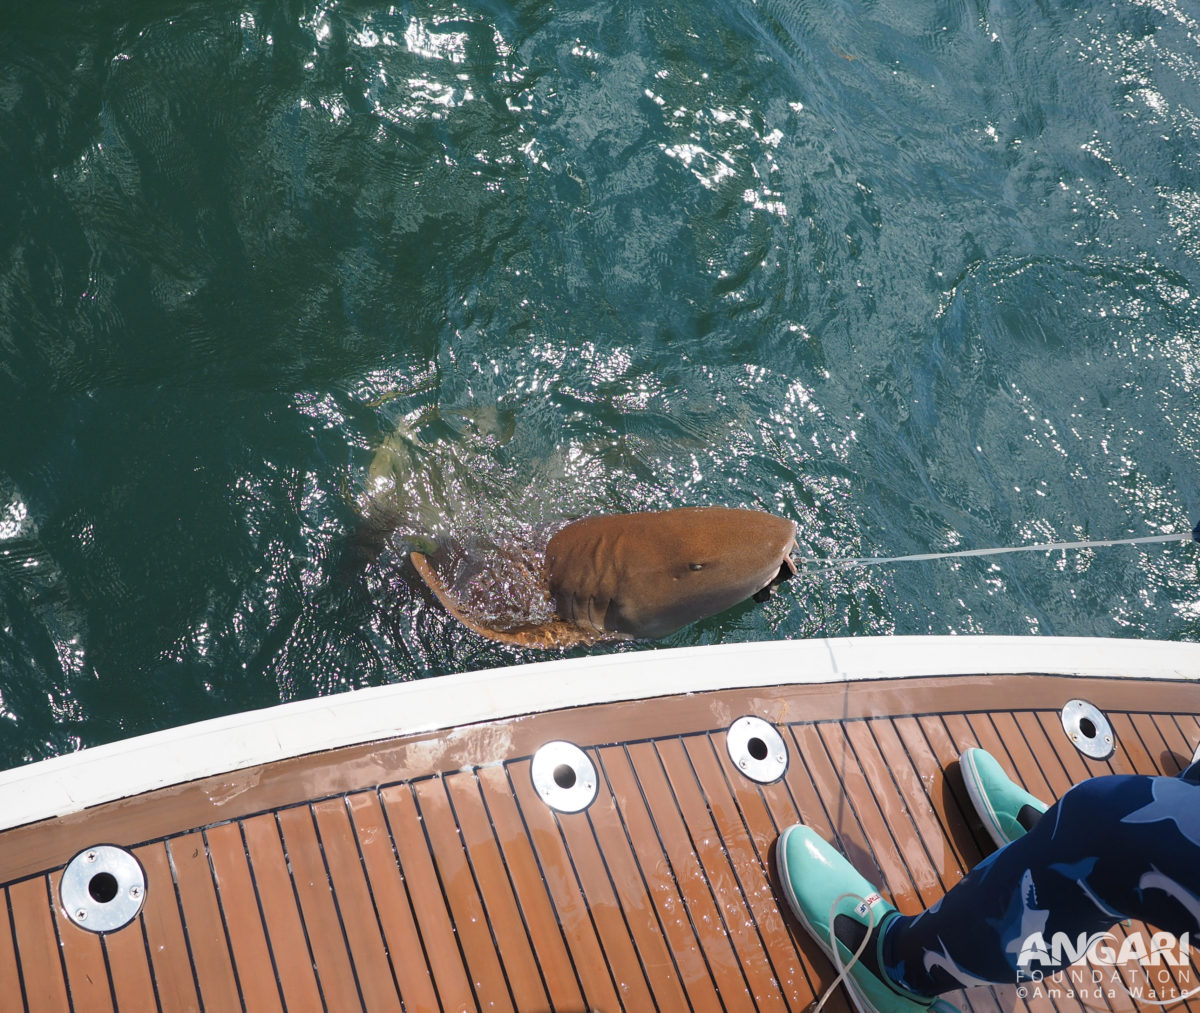 EXP 60: We got a nurse shark! FIU scientists will secure the shark off the stern for a quick workup. PC: Amanda Waite